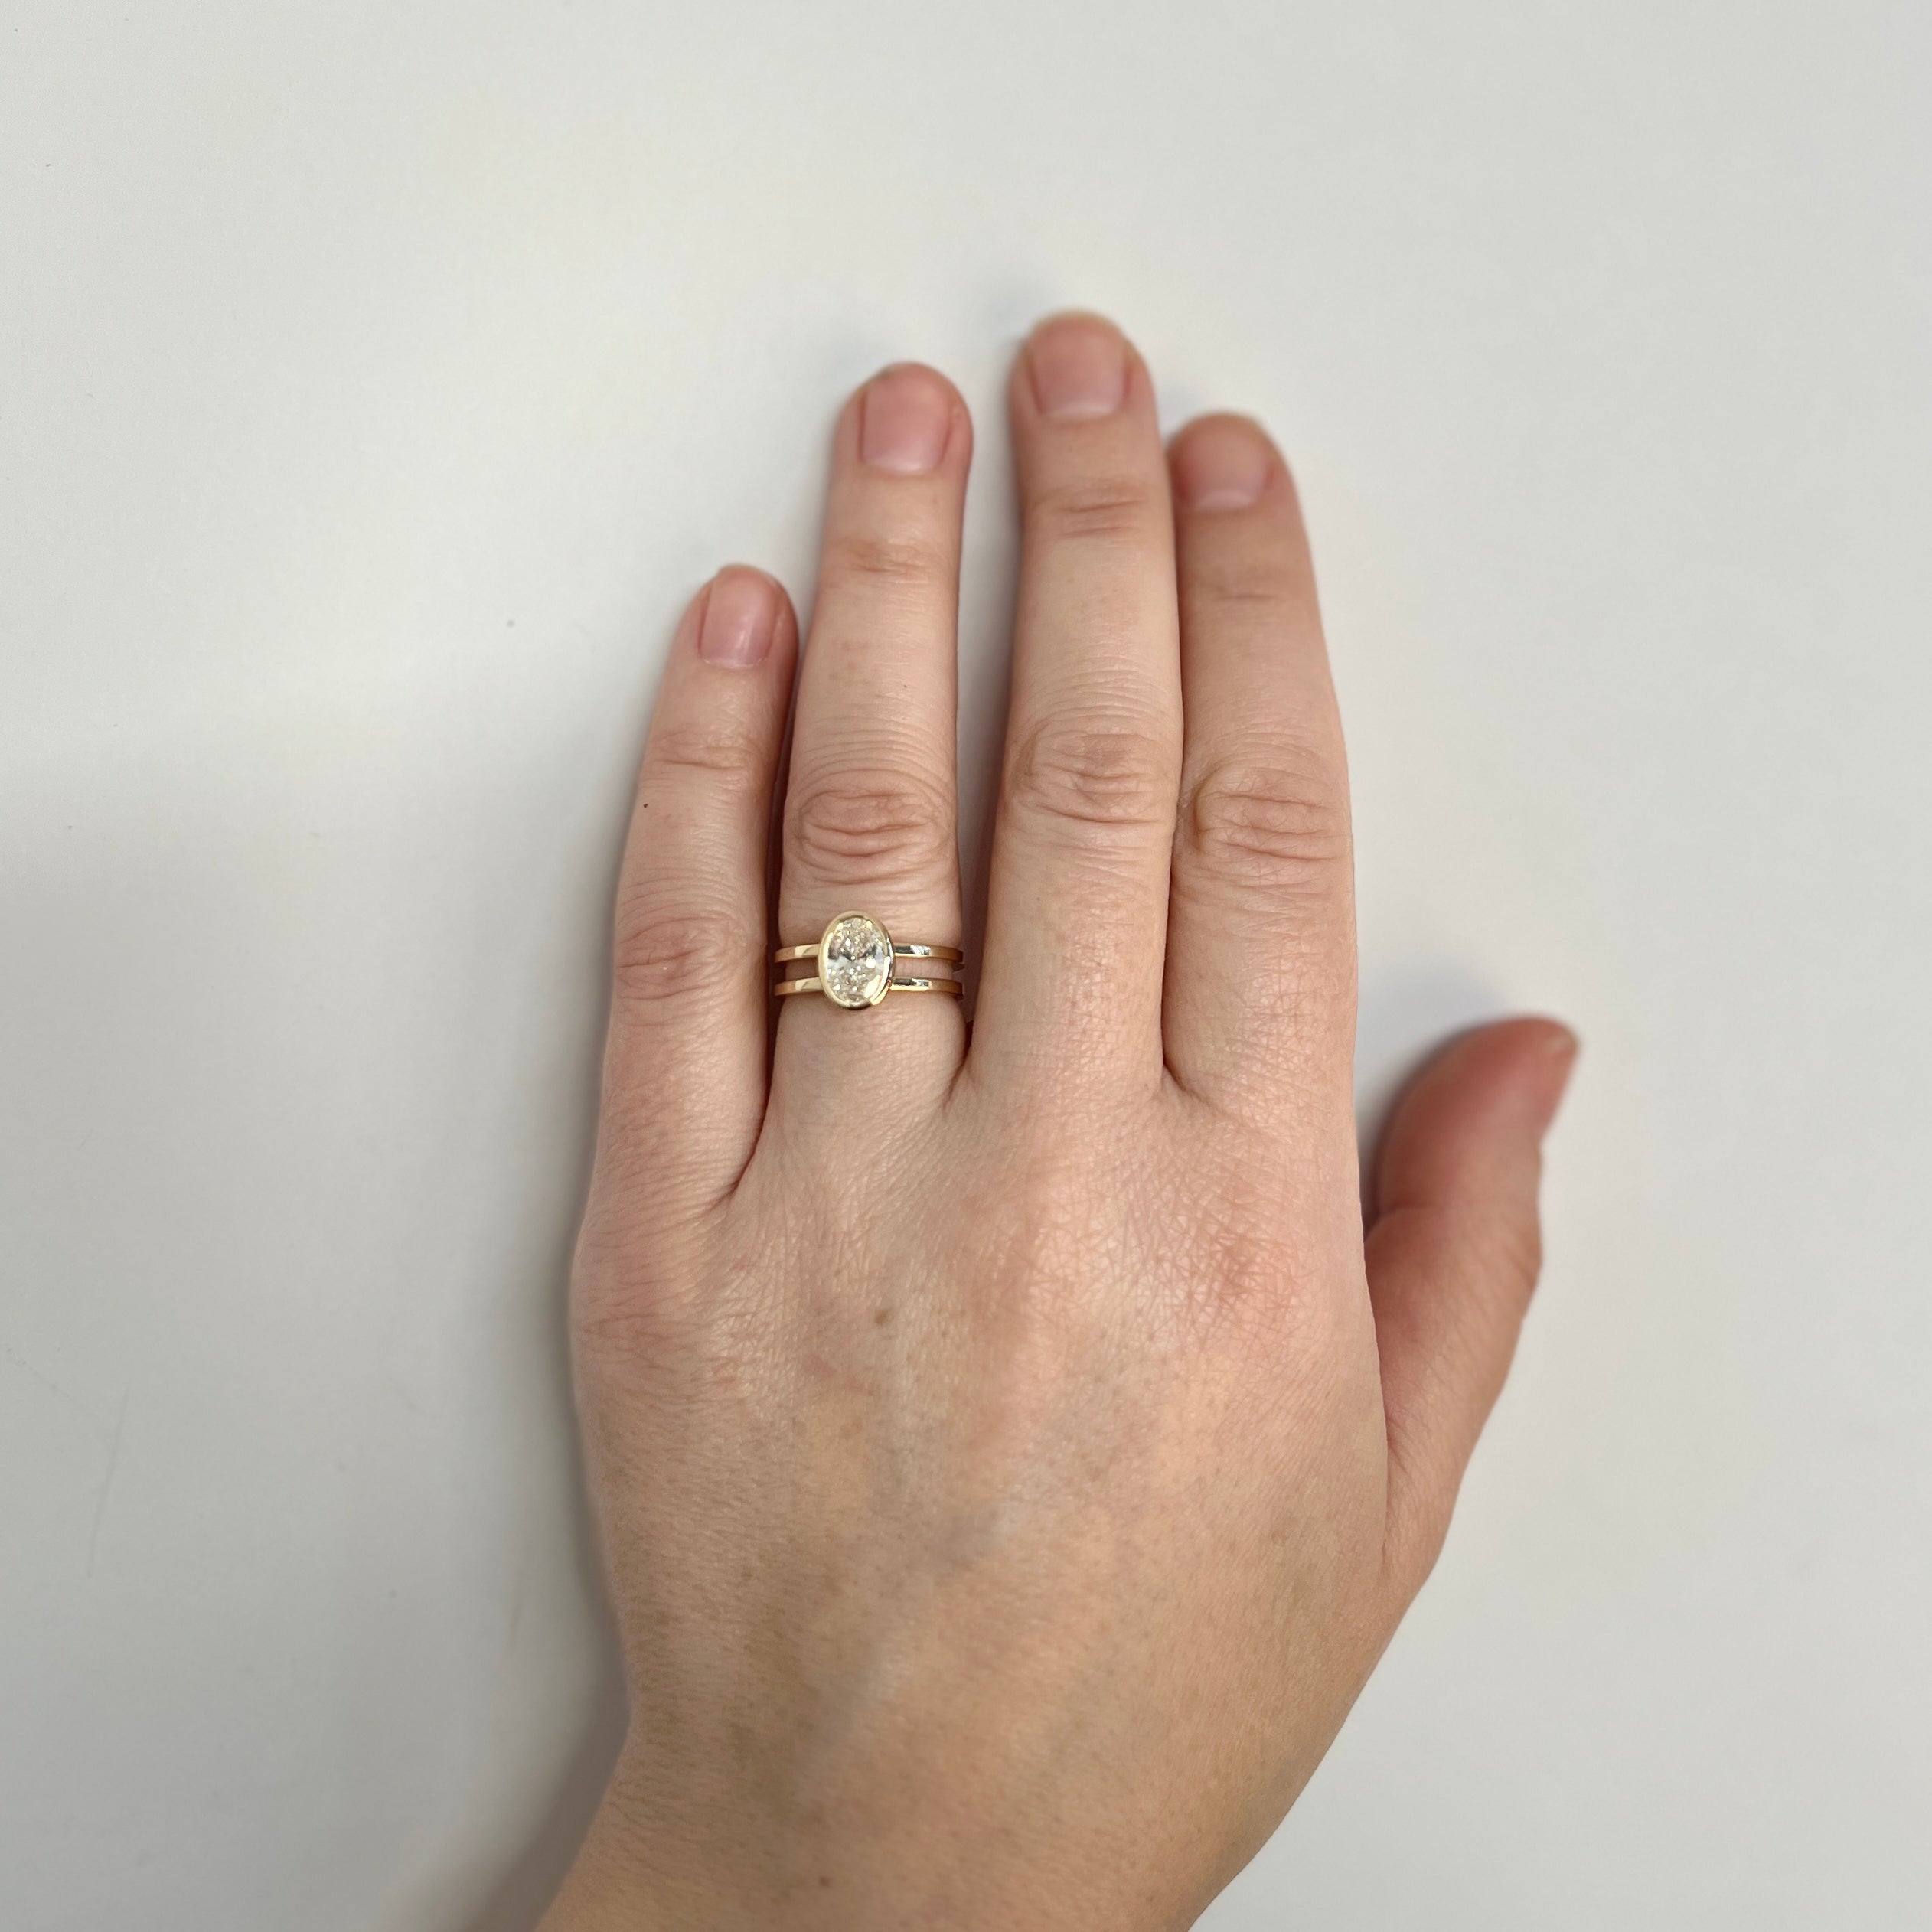 Unusual Benu Ring in sustainable 14 karat yellow gold set with a G VS1 1.17ct lab-created diamond made in NYC by SHW fine Jewelry